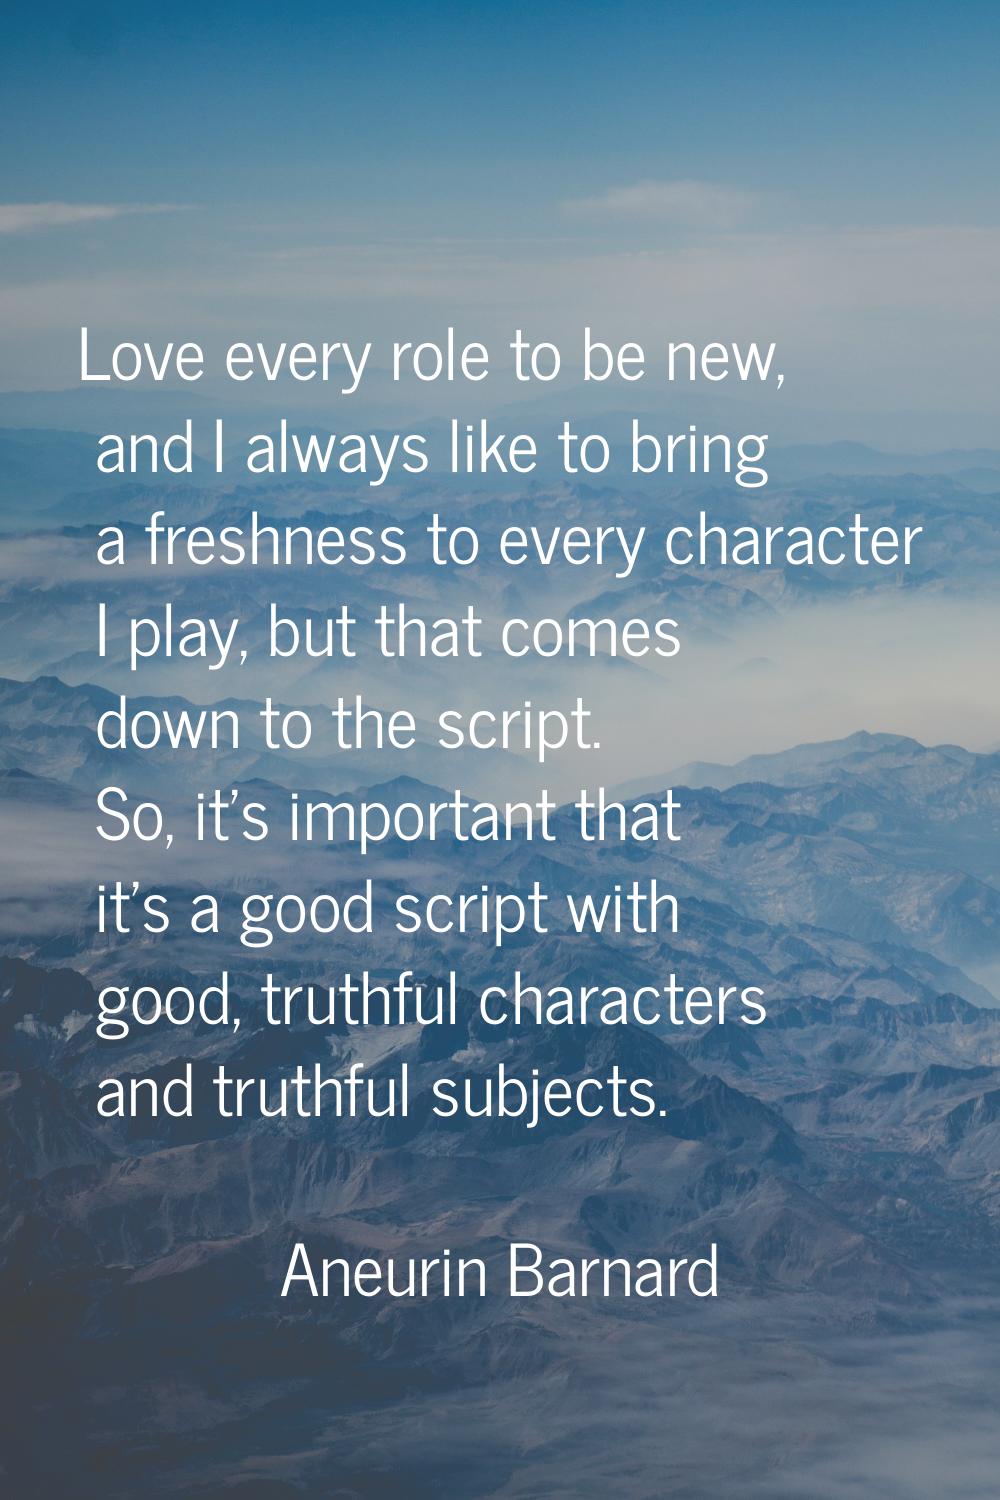 Love every role to be new, and I always like to bring a freshness to every character I play, but th